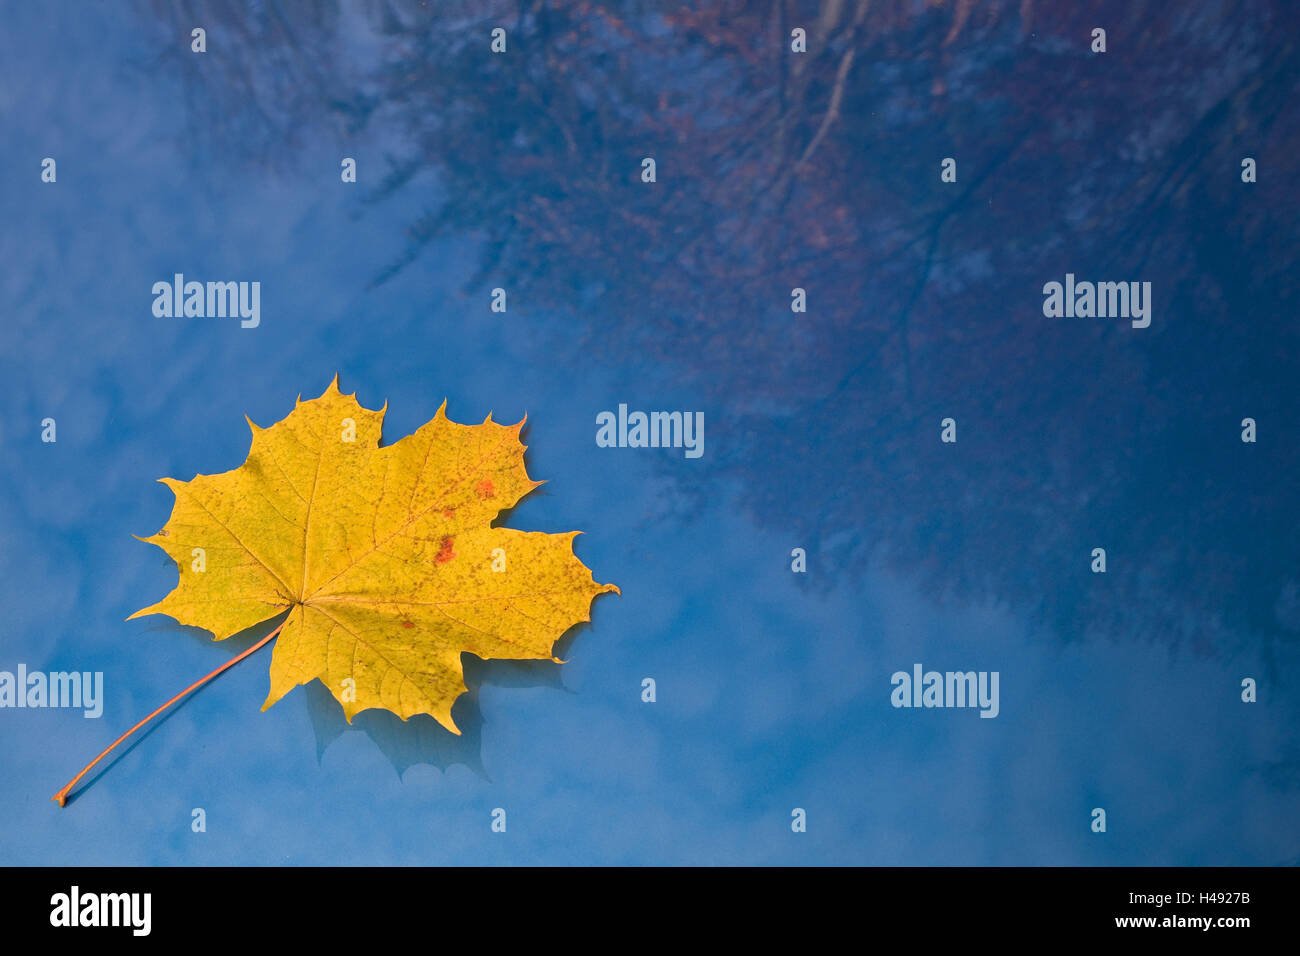 Autumn leaves, leaf on a blue background, Stock Photo